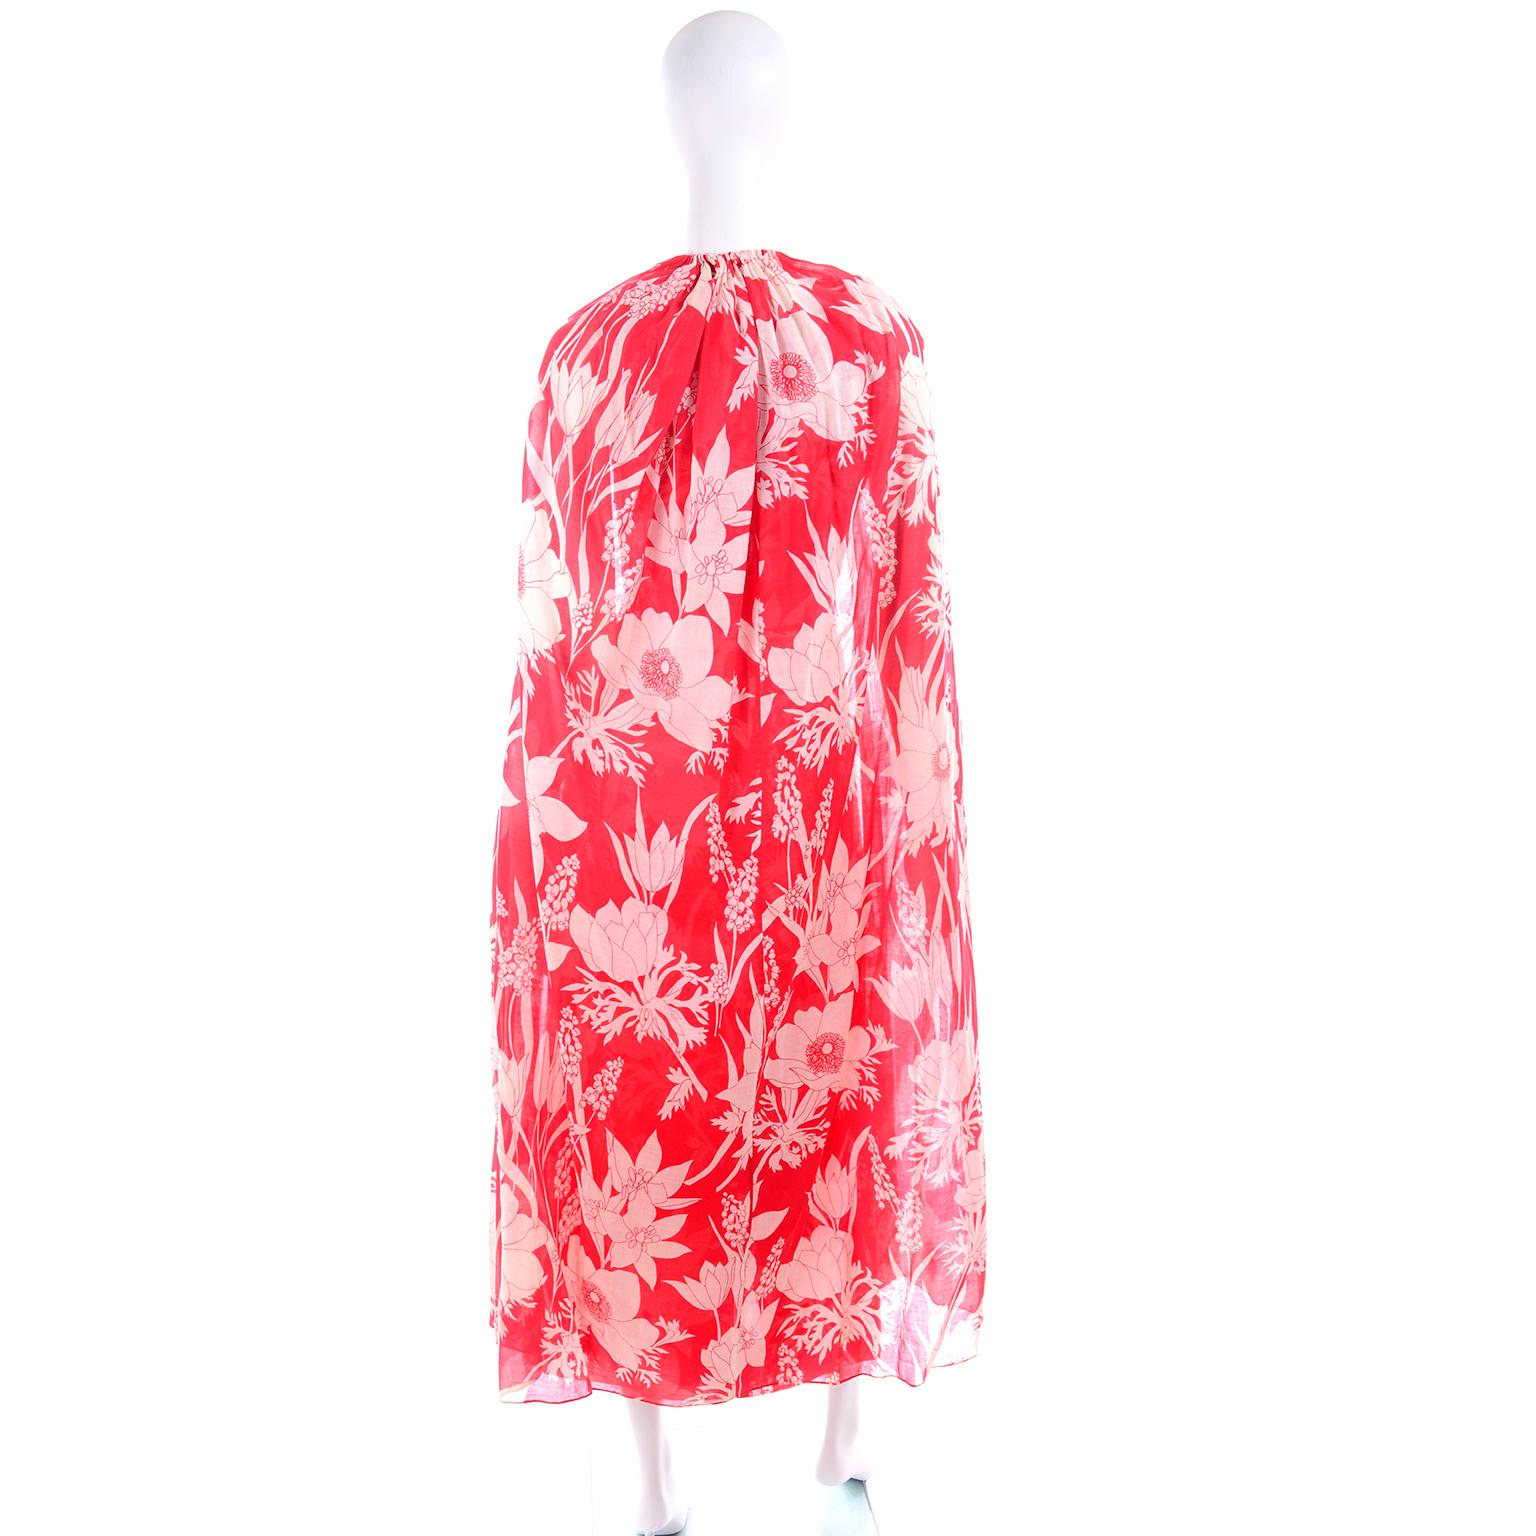 Adele Simpson Vintage 1970s Dress & Cape in Red & White Cotton Floral Print  1